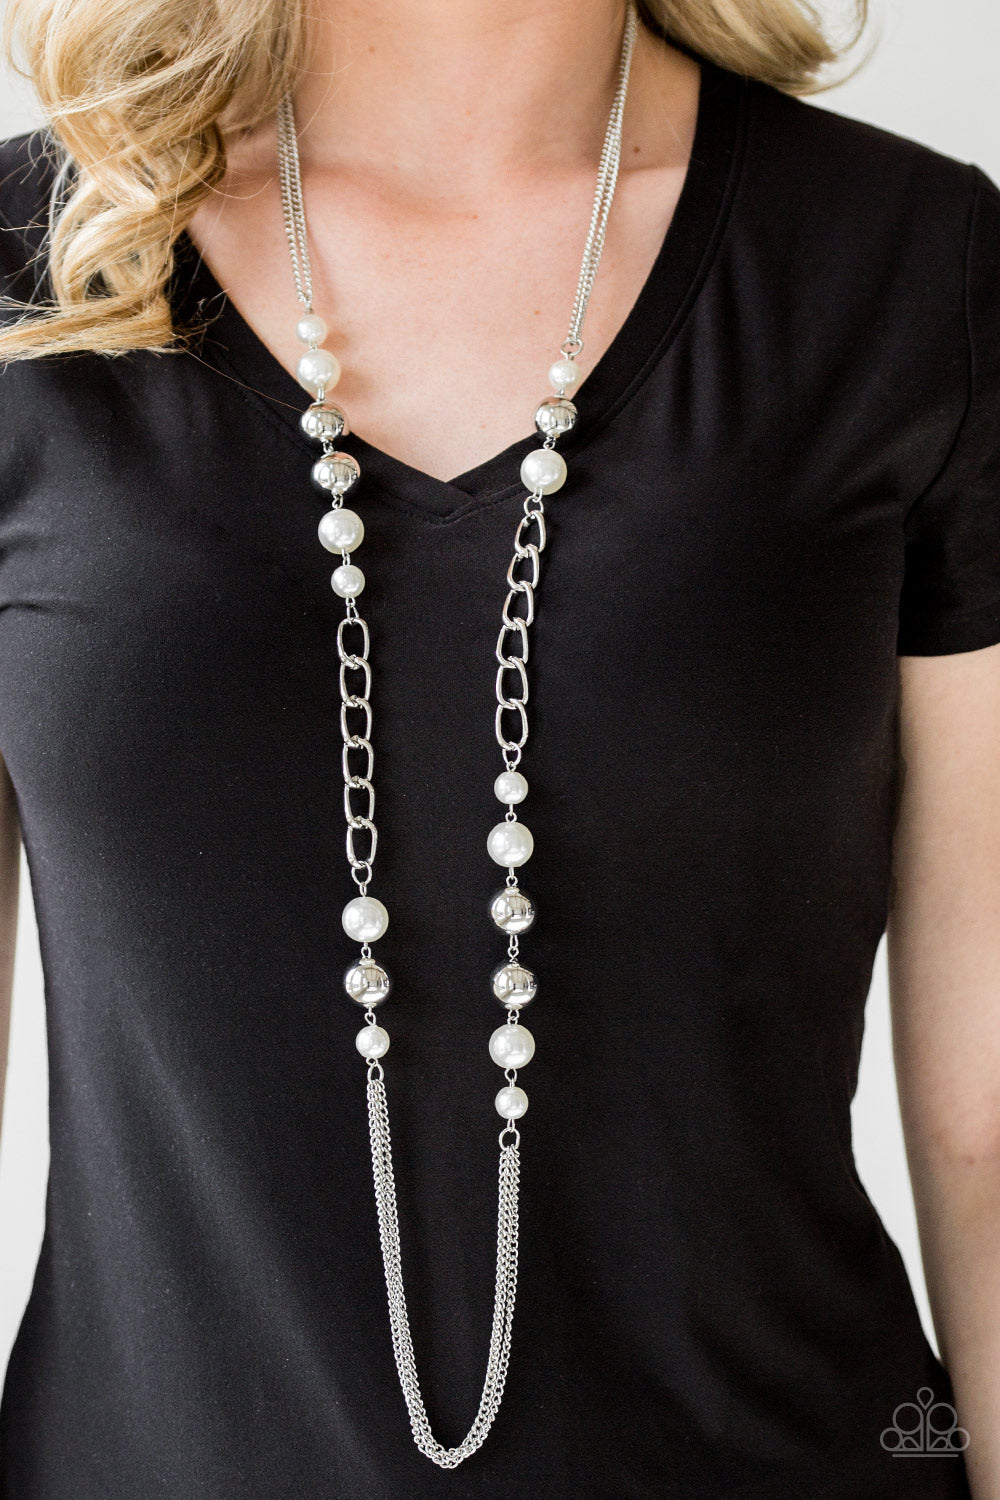 Paparazzi Uptown Talker - White Pearly & Silver Beads - Necklace & Earrings - $5 Jewelry With Ashley Swint